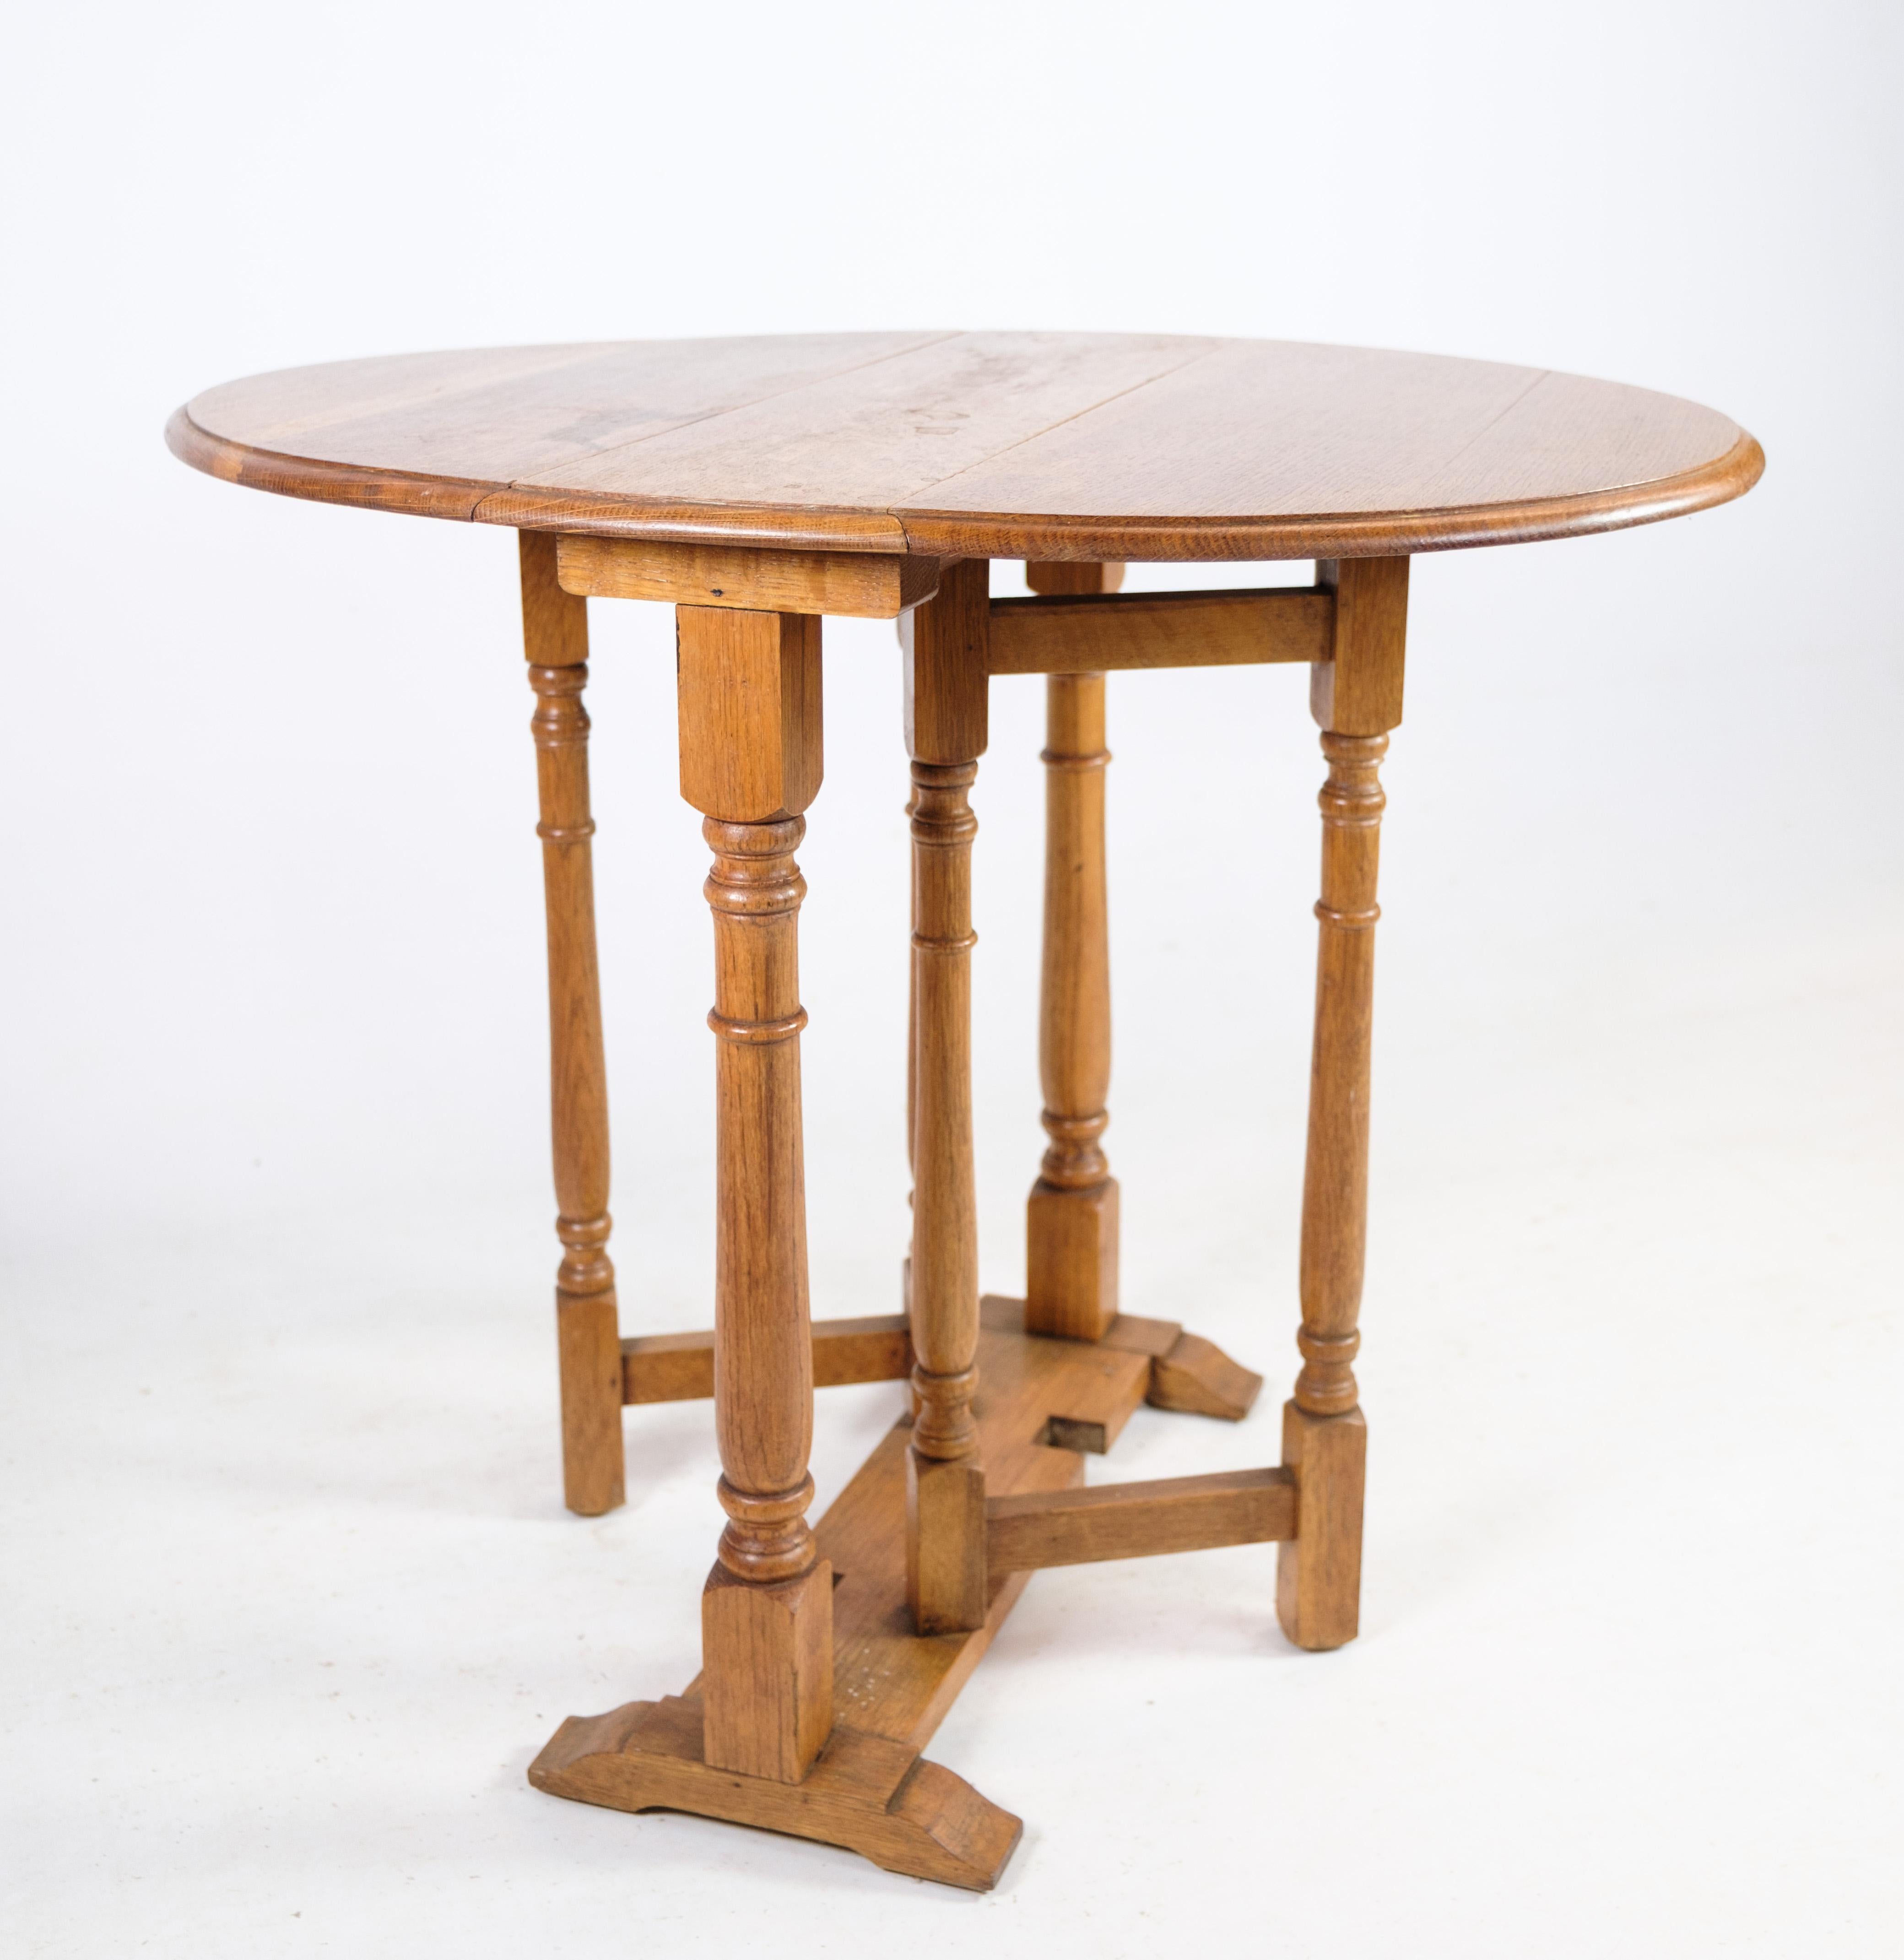 This exquisite folding table harkens back to the late 19th century, boasting the timeless elegance and sturdy craftsmanship characteristic of the Victorian era. Crafted from solid oak wood, this table exudes warmth and character, with its natural